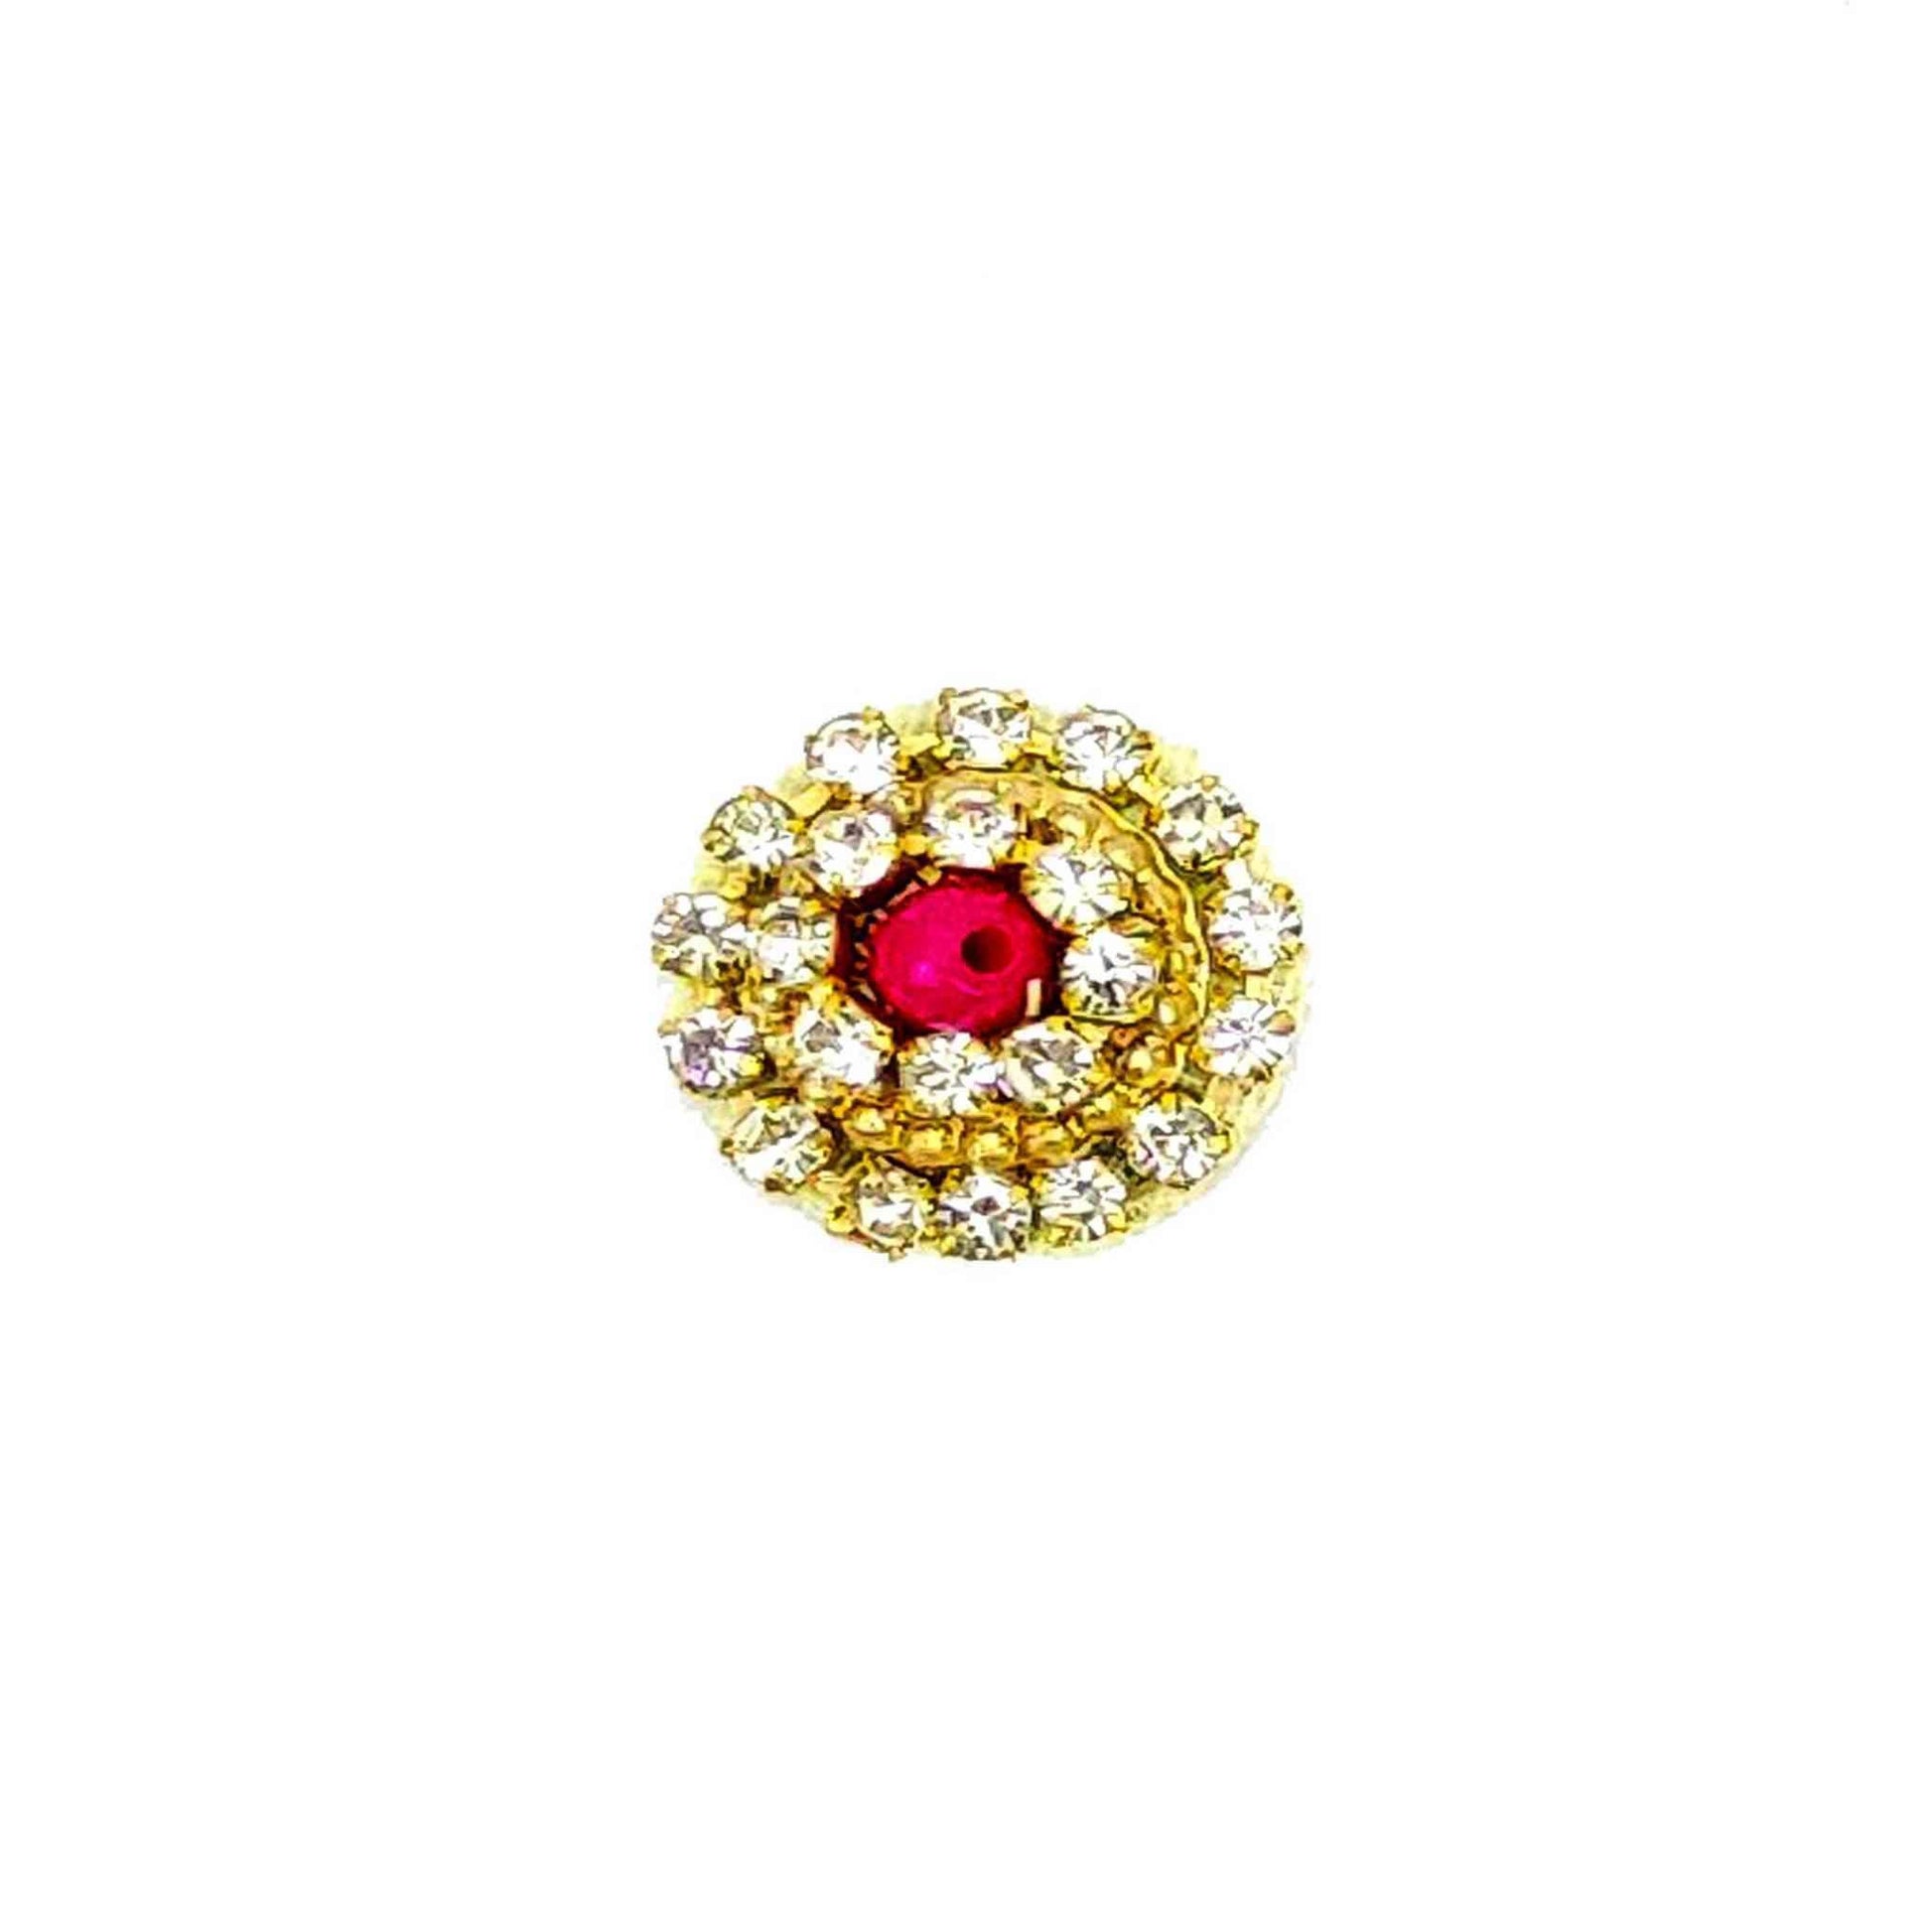 Indian Petals Rhinestone Studded Buti for DIY Craft, Trousseau Packing or Decoration (Bunch of 12) - Design 220, Crimson - Indian Petals